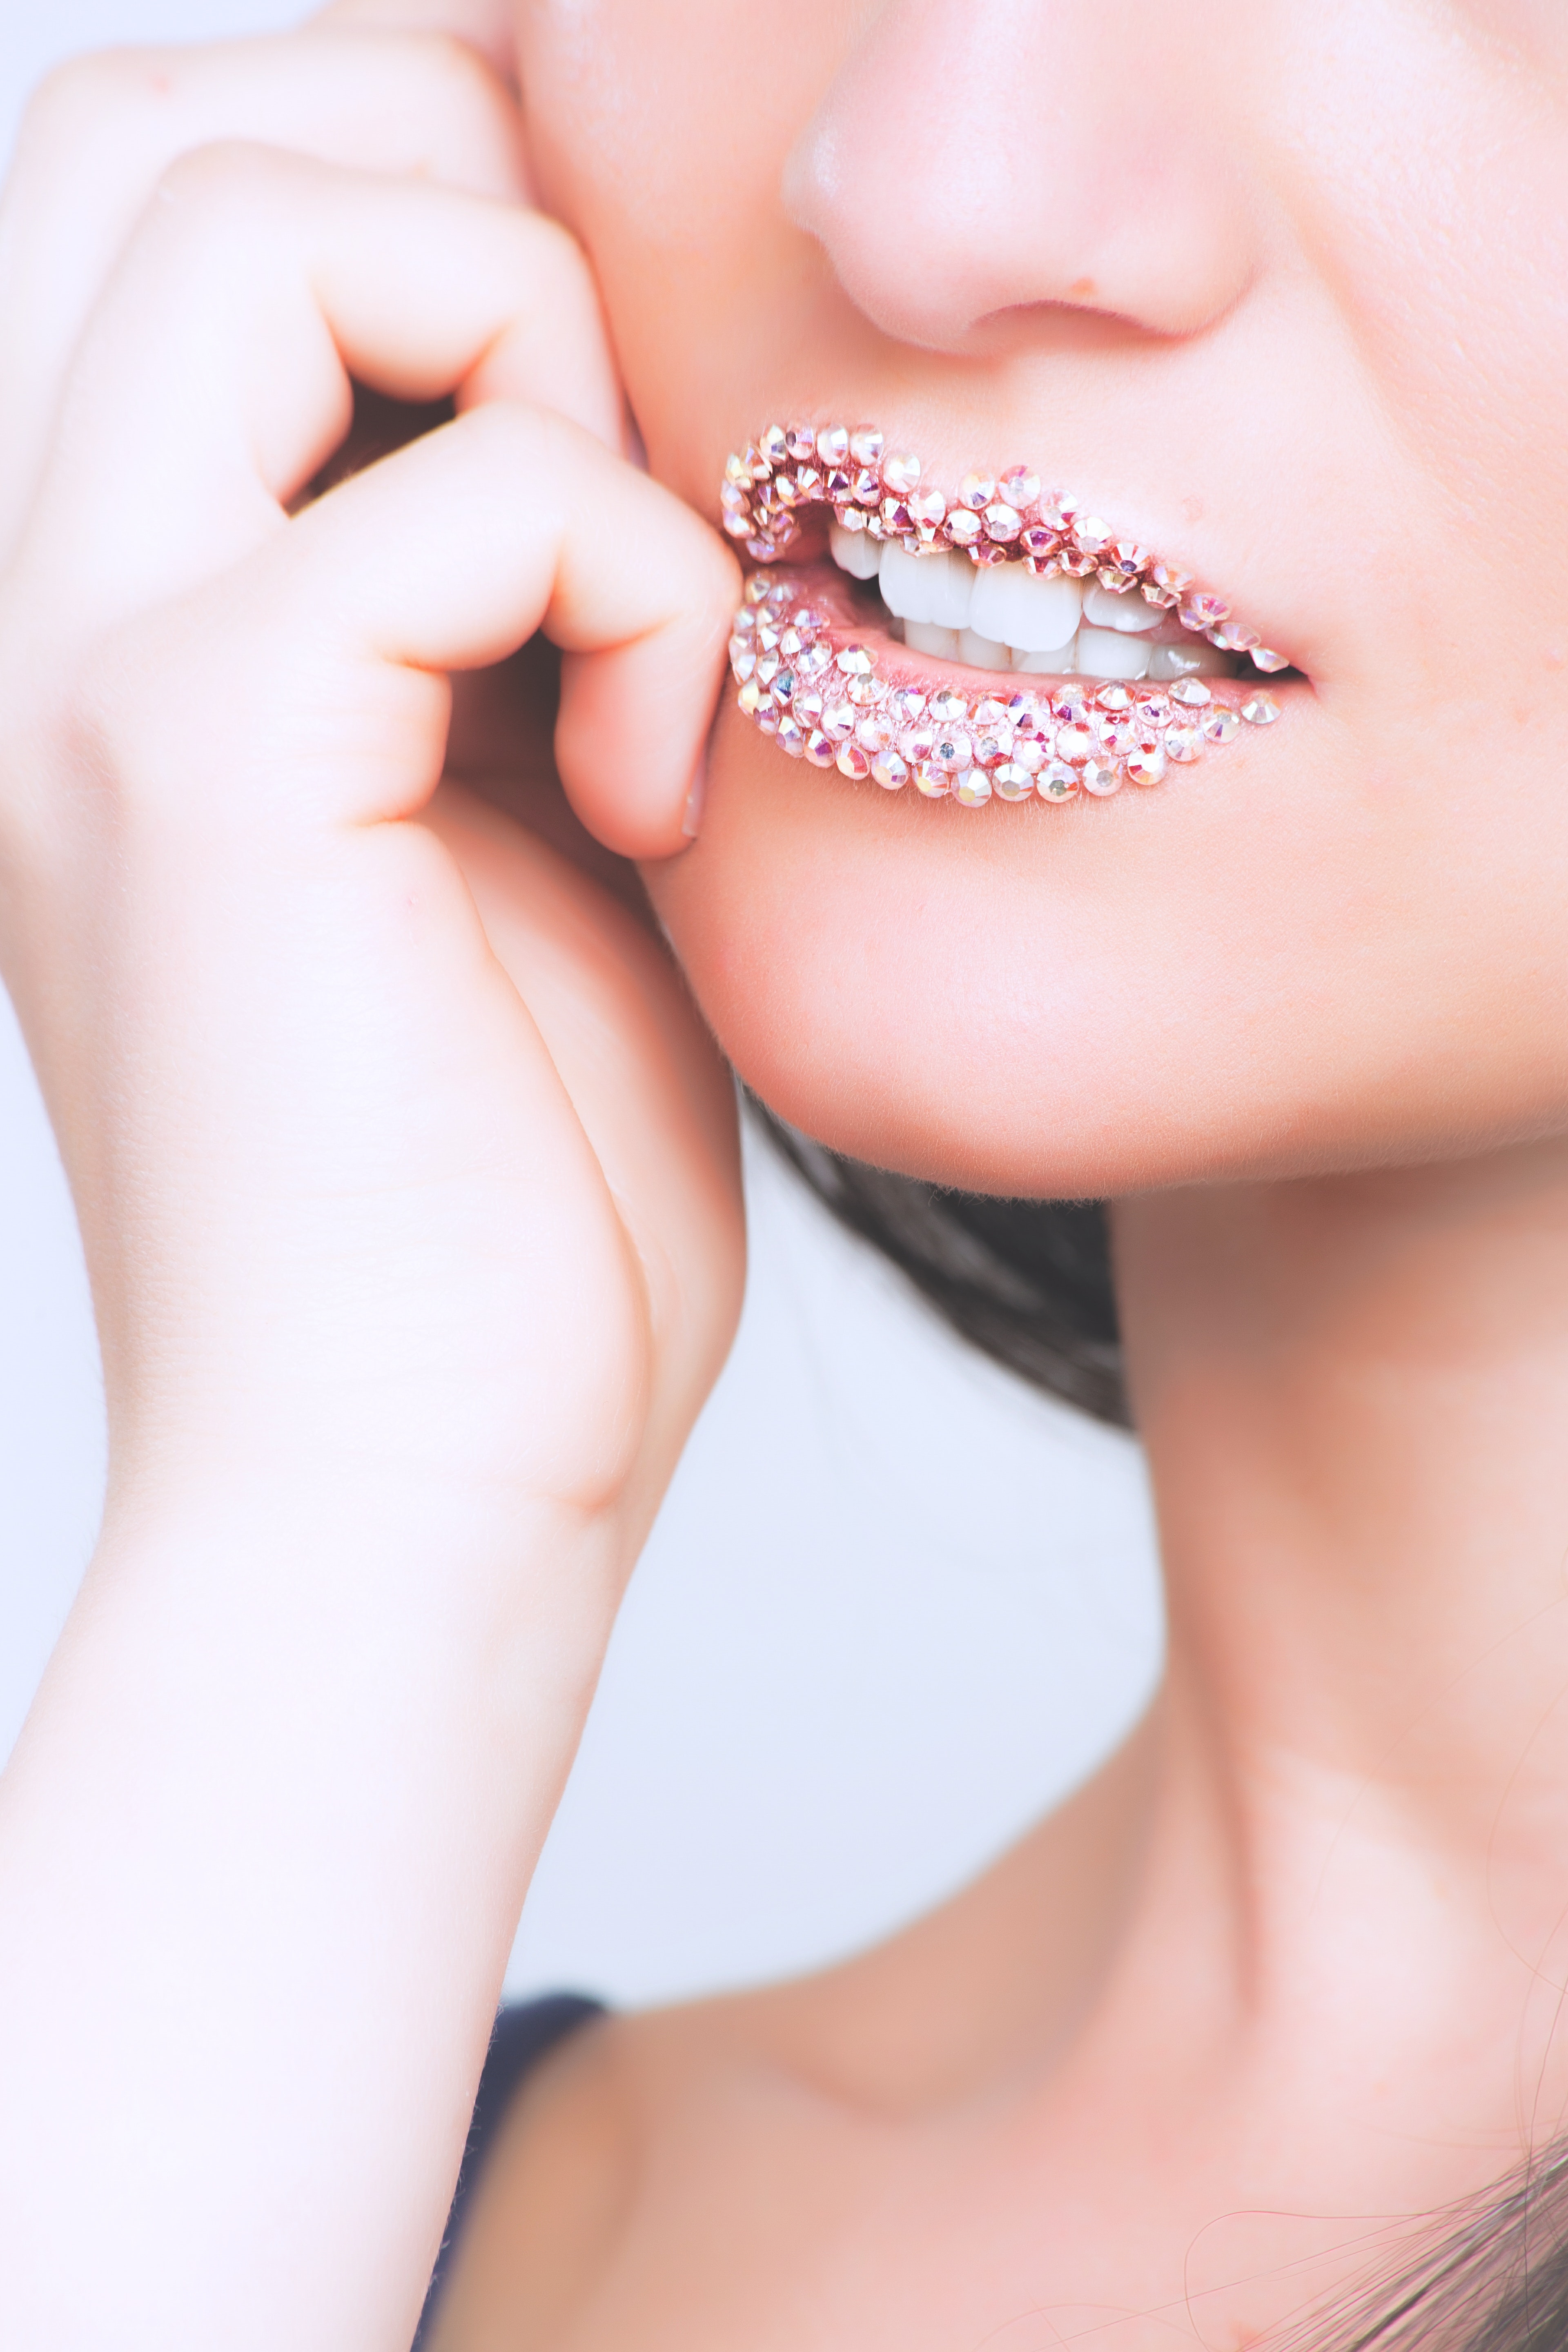 Woman with earrings on lips photo